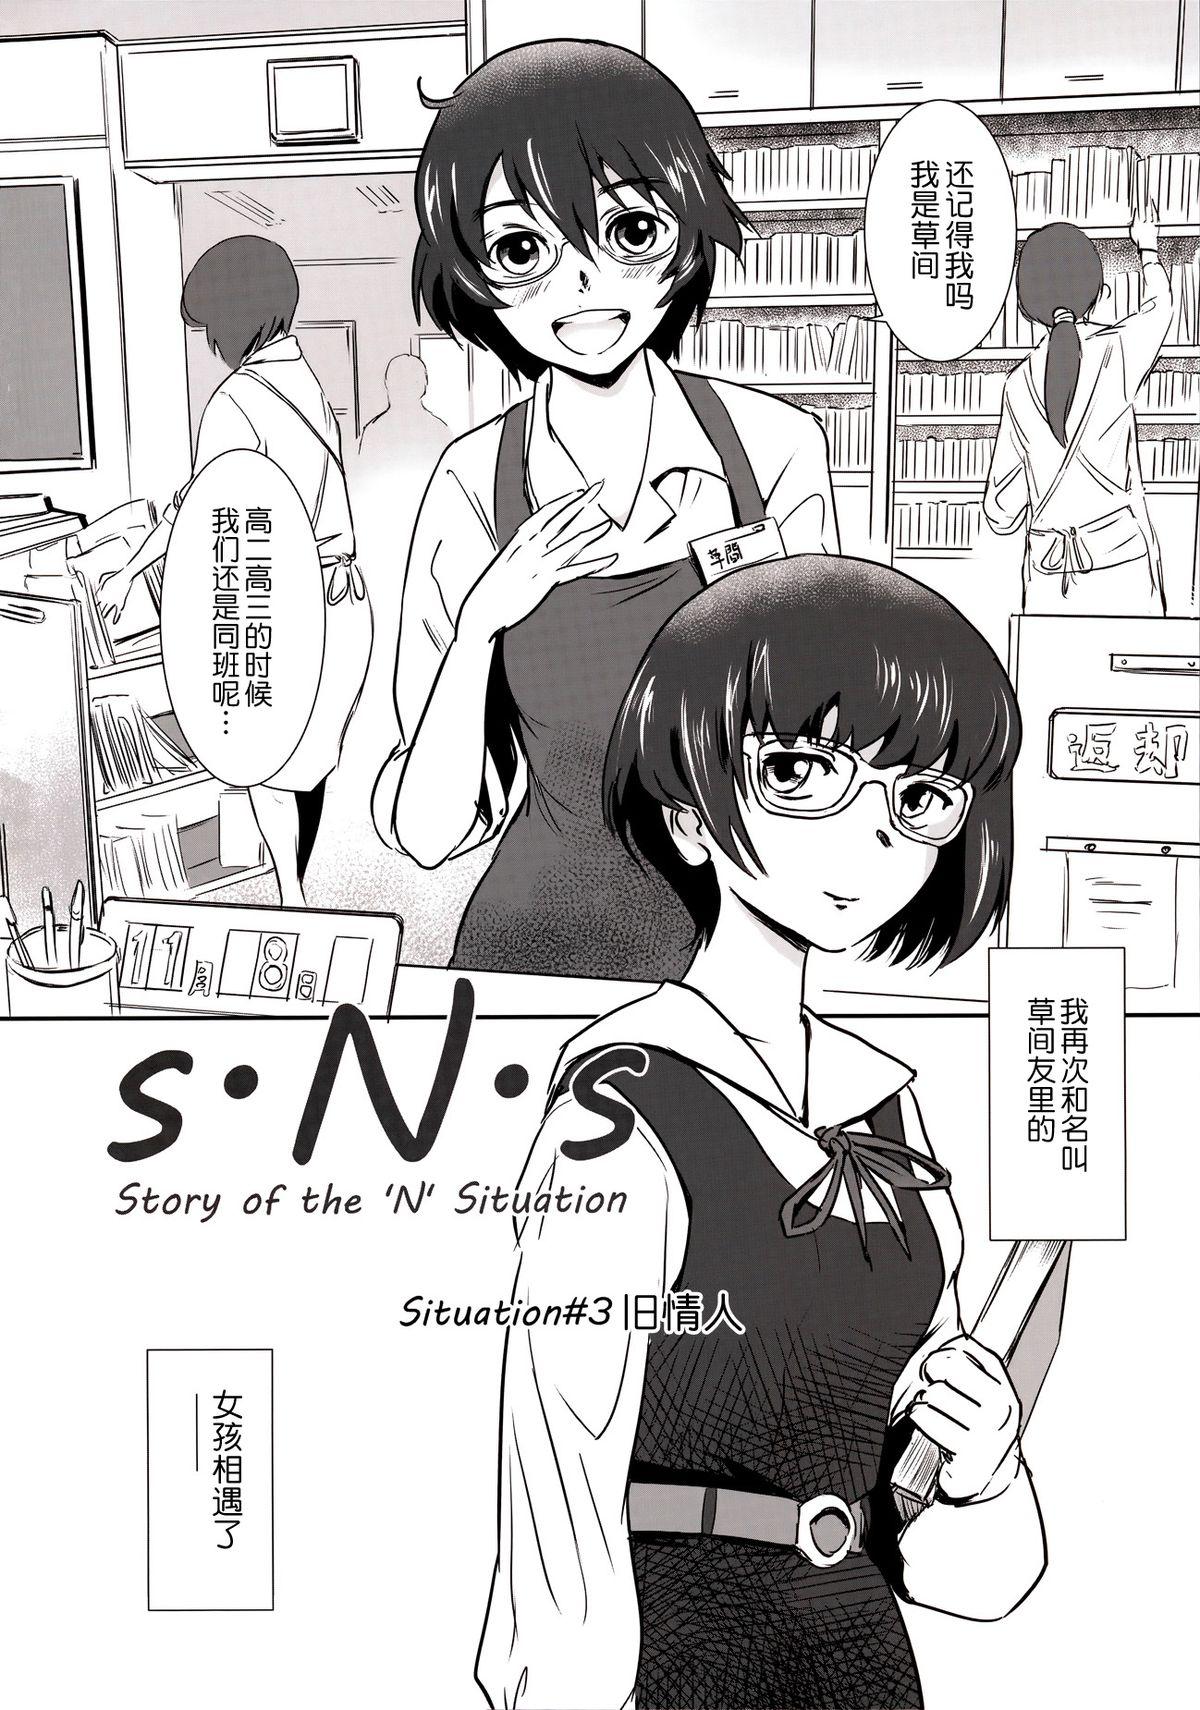 Story of the 'N' Situation - Situation#3 Mukasino Otoko 3